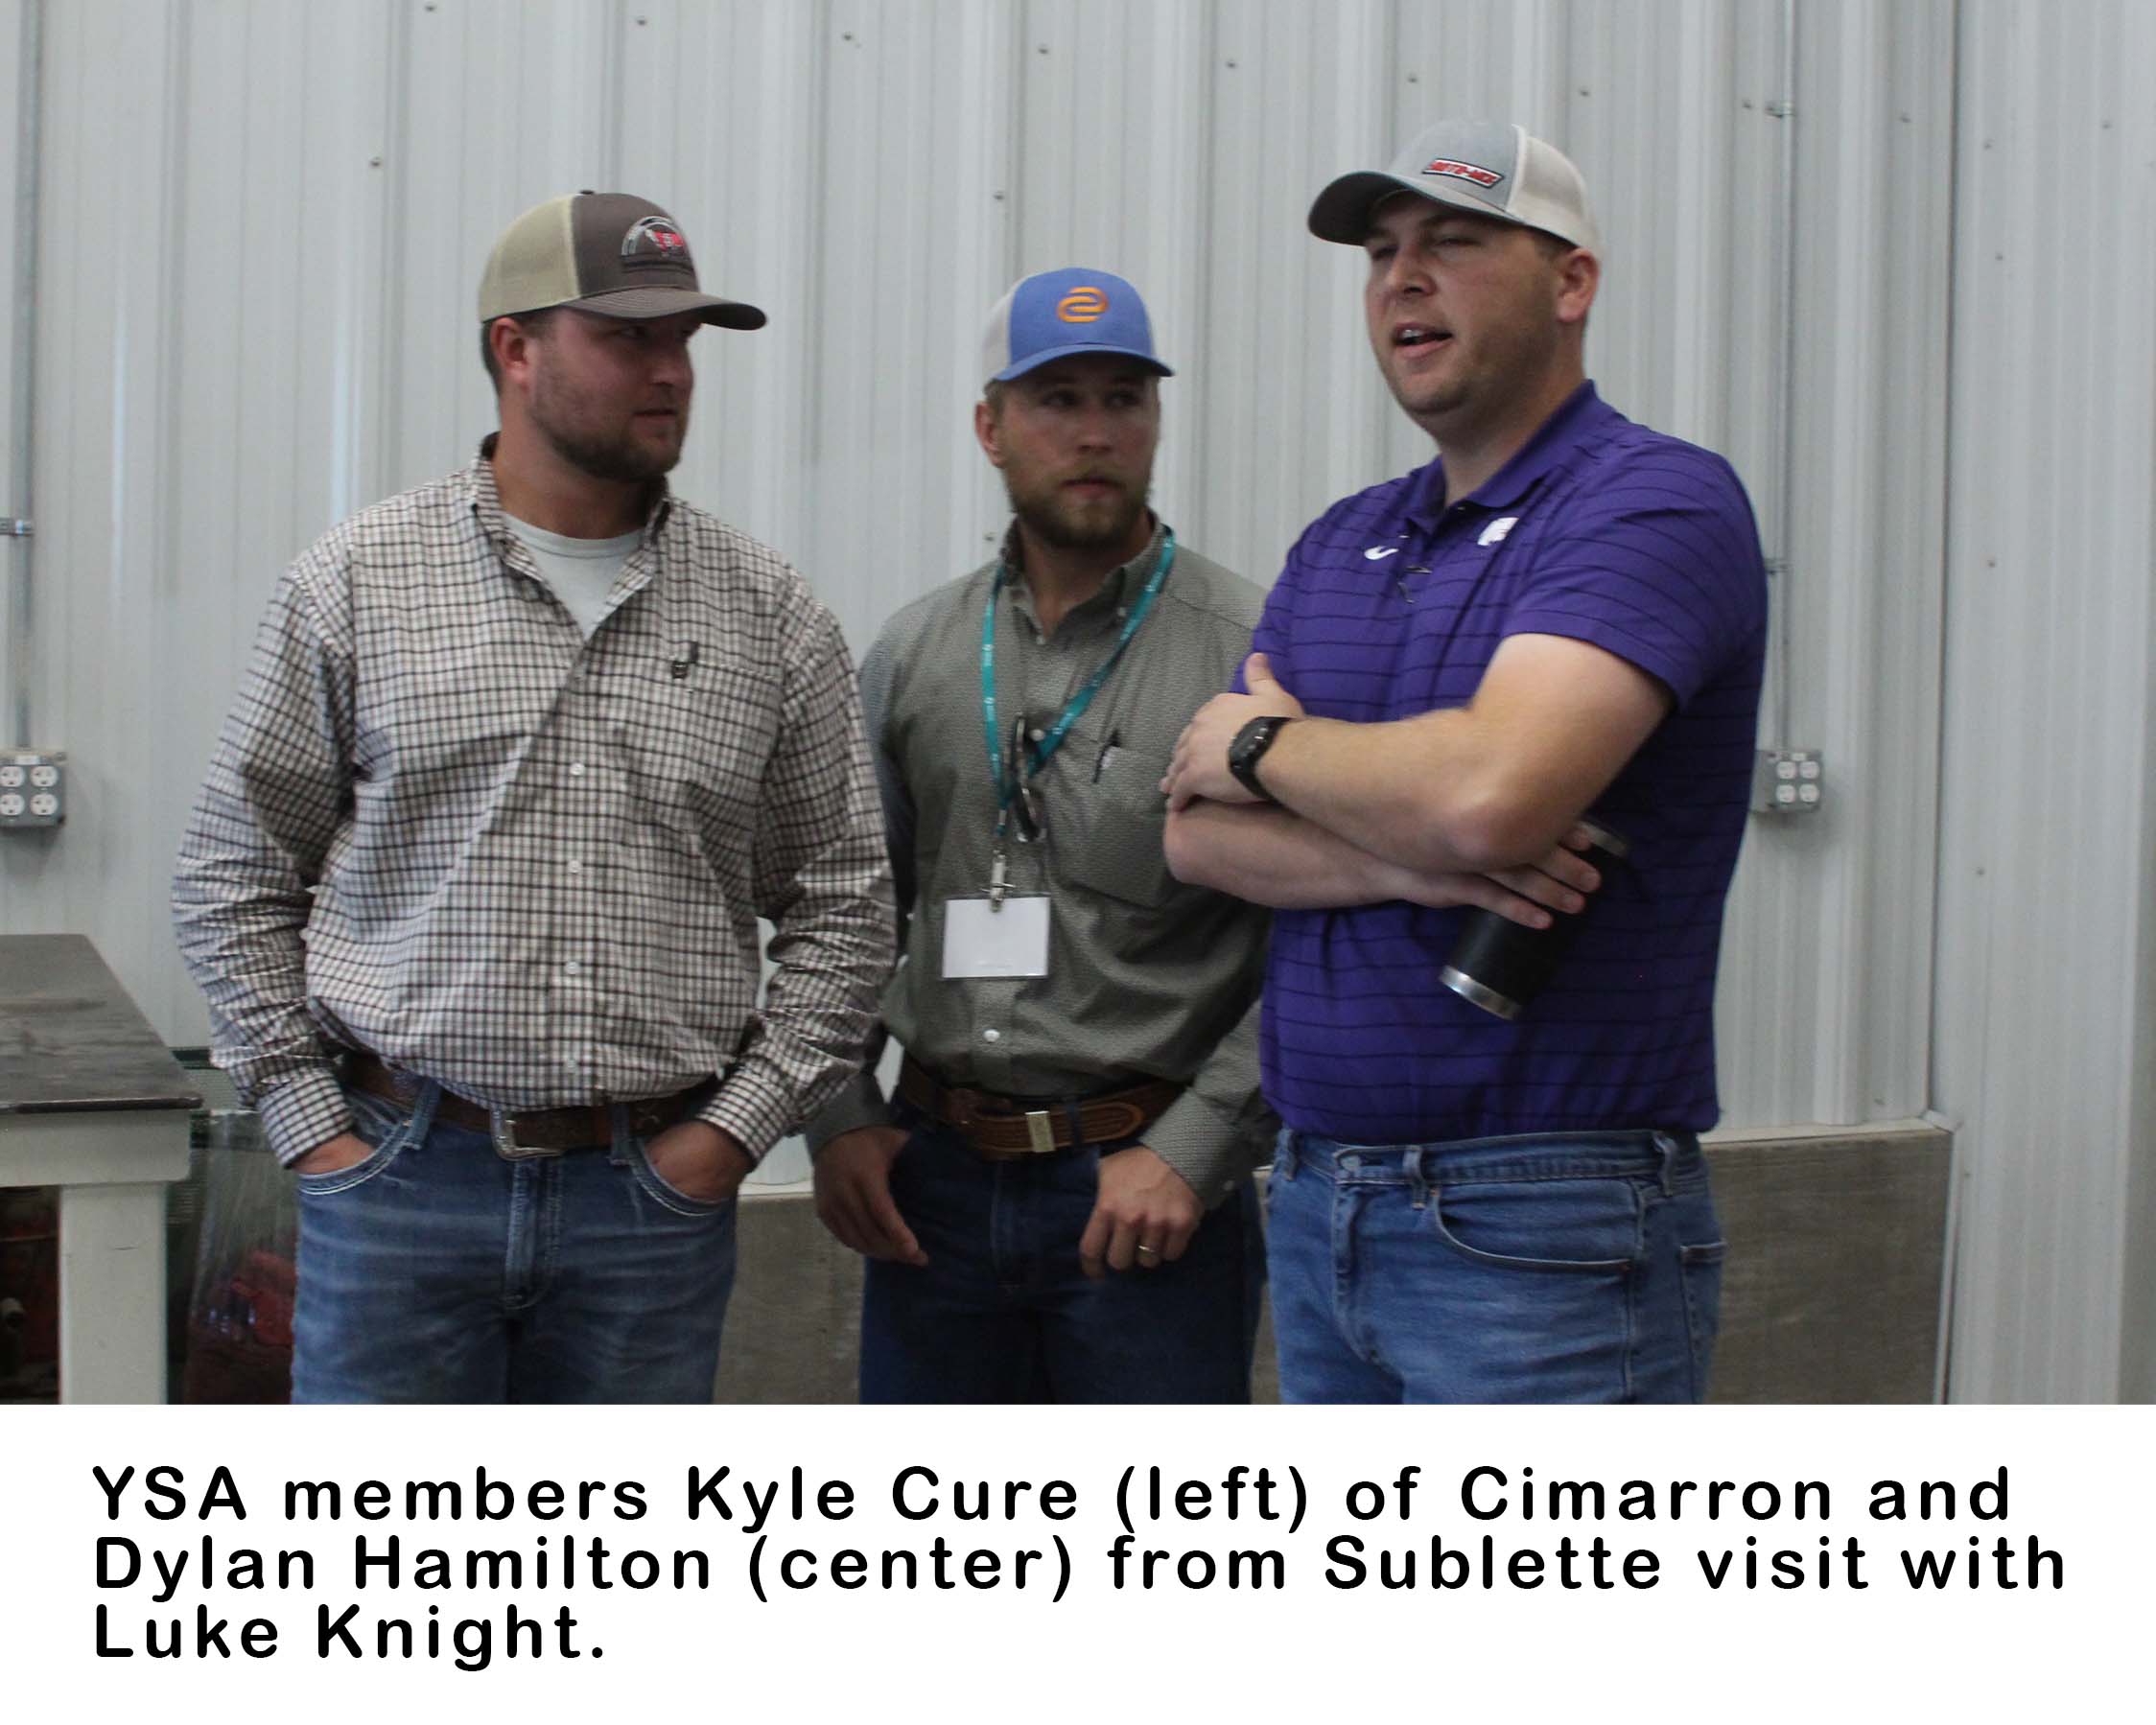 YSA Class Tours Cattle Businesses  In Central, Western Kansas